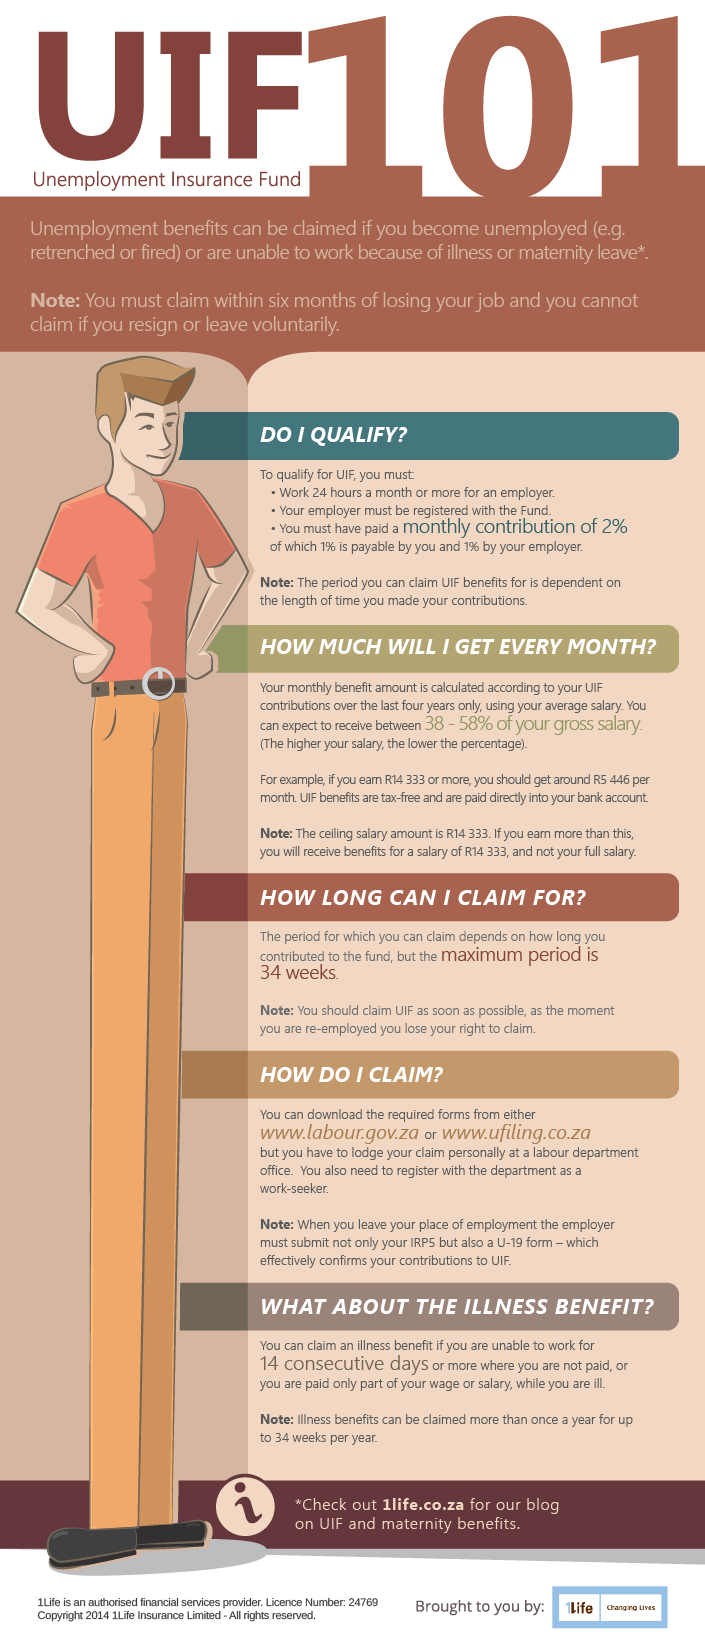 How to claim UIF infographic